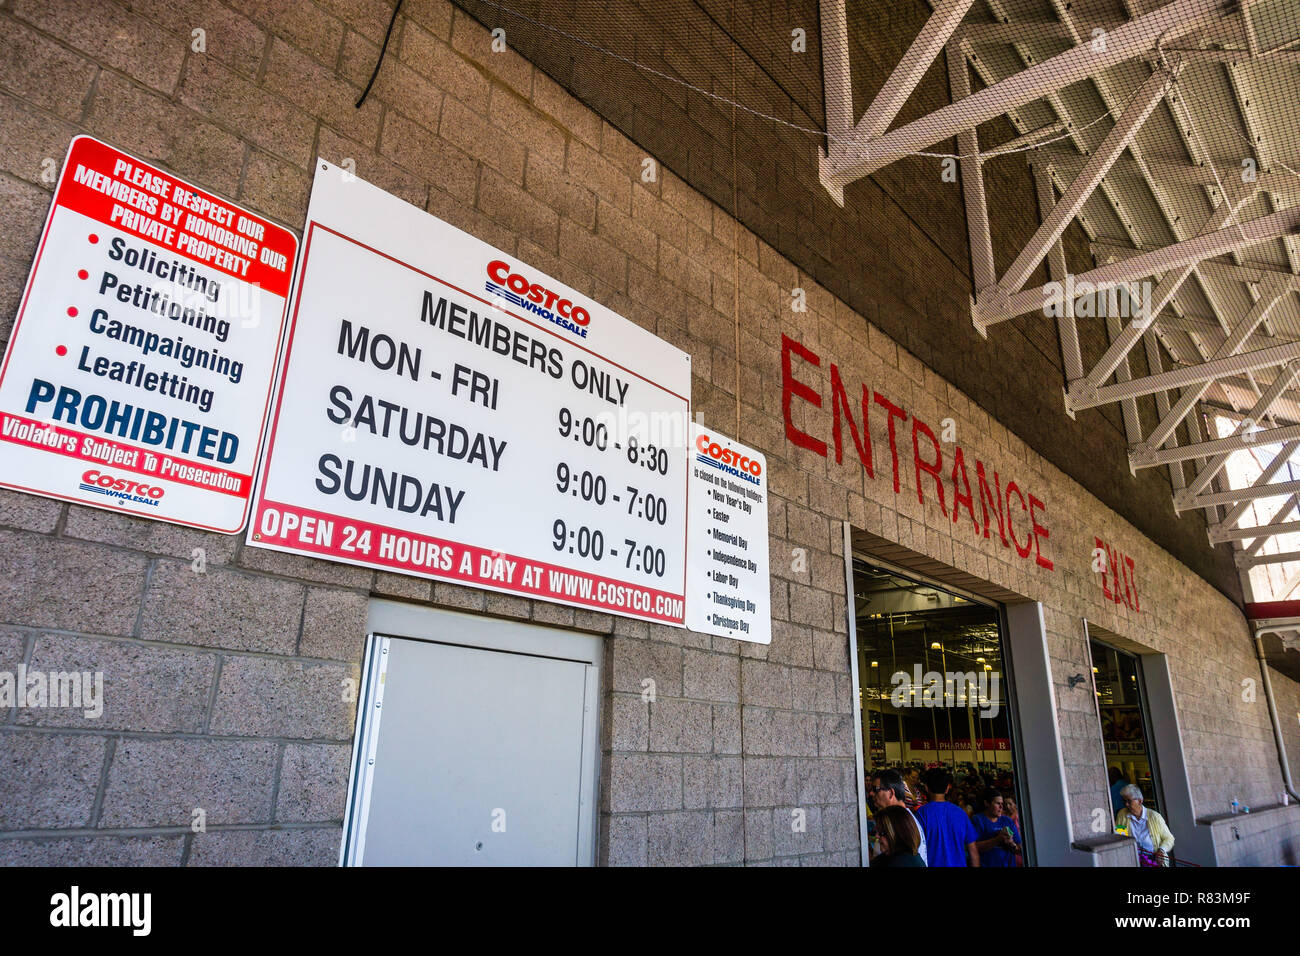 August 6, 2018 Mountain View / CA / USA - Entrance / Exit to one of the Costco Wholesale supermarkets in south San Francisco bay area; stores hours di Stock Photo